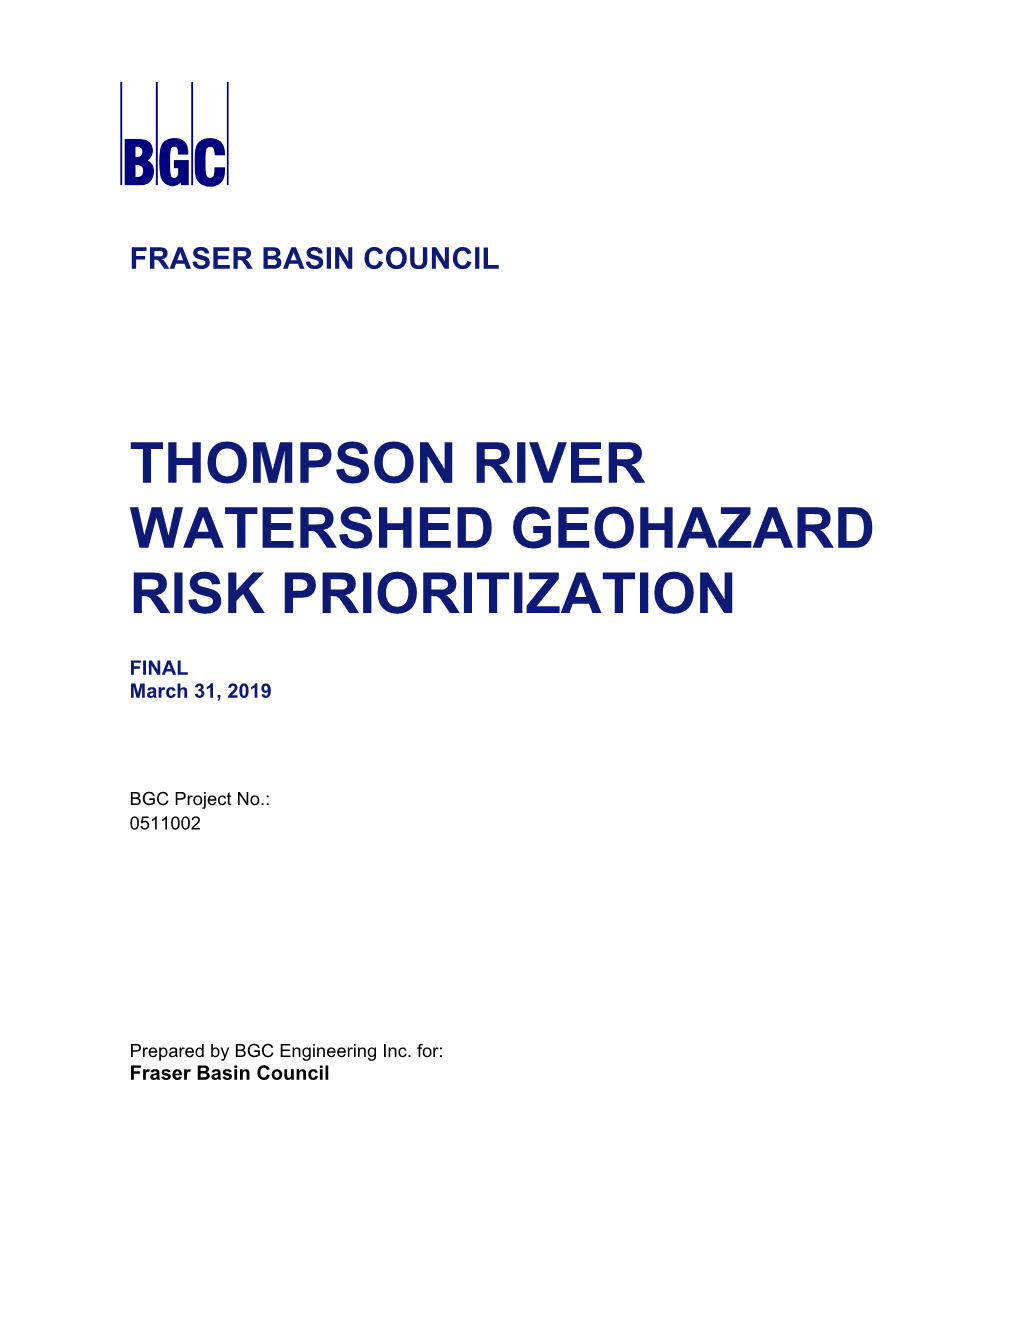 Thompson River Watershed Geohazard Risk Prioritization